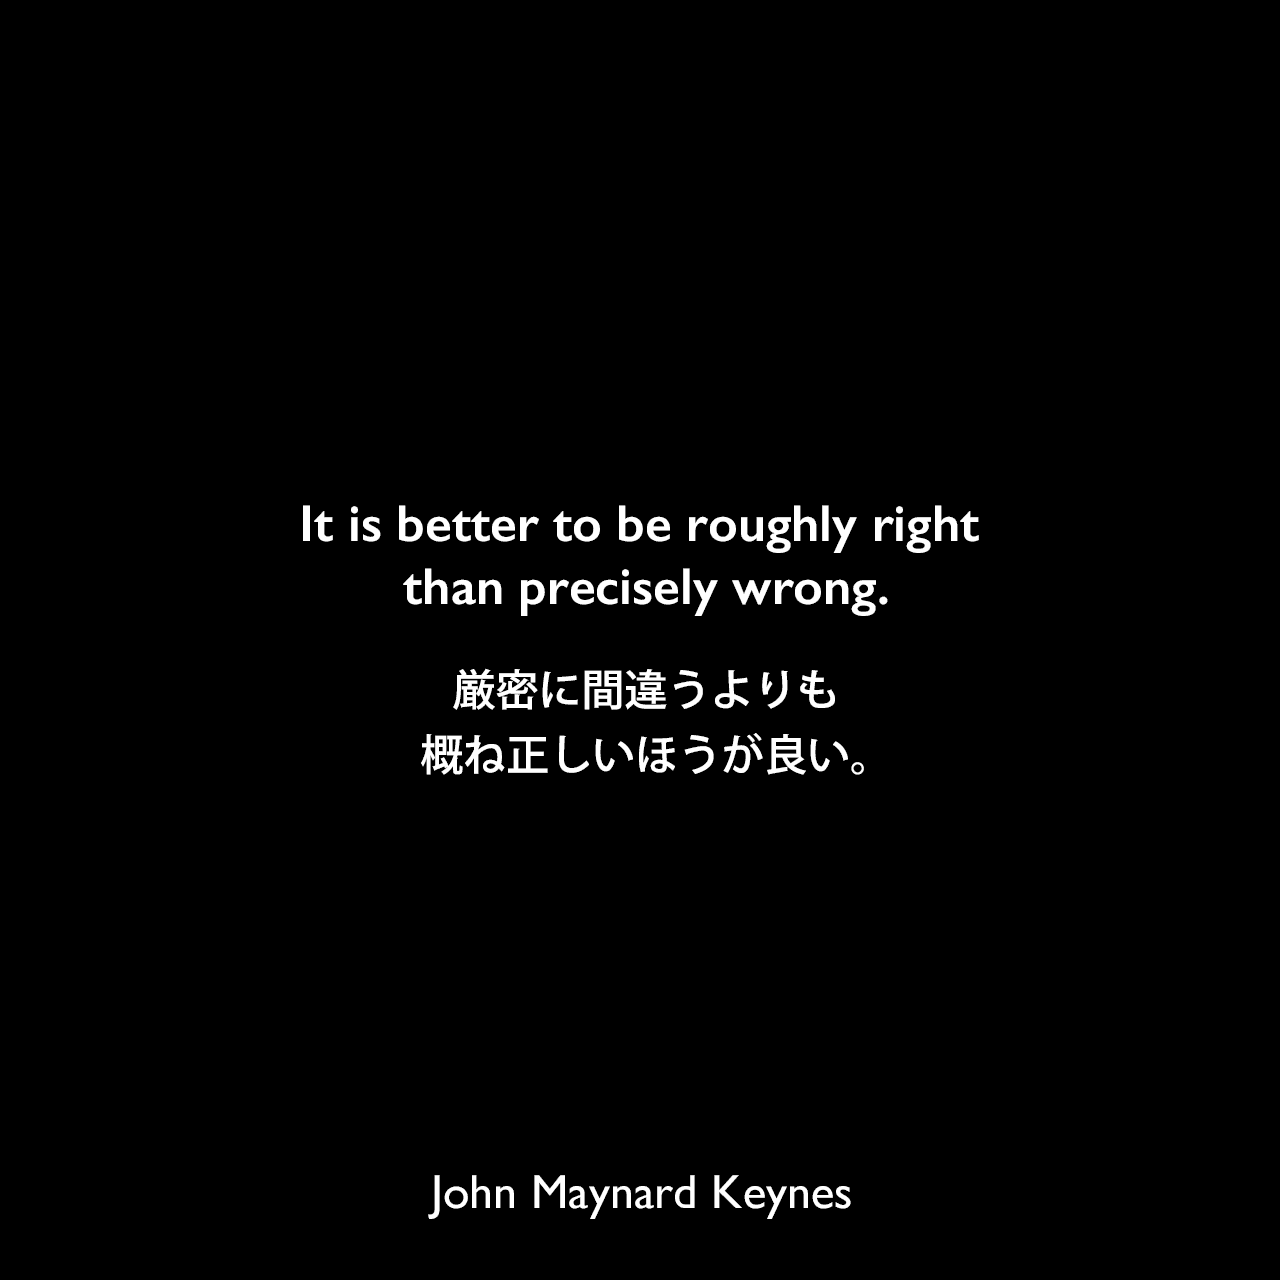 It is better to be roughly right than precisely wrong.厳密に間違うよりも、概ね正しいほうが良い。